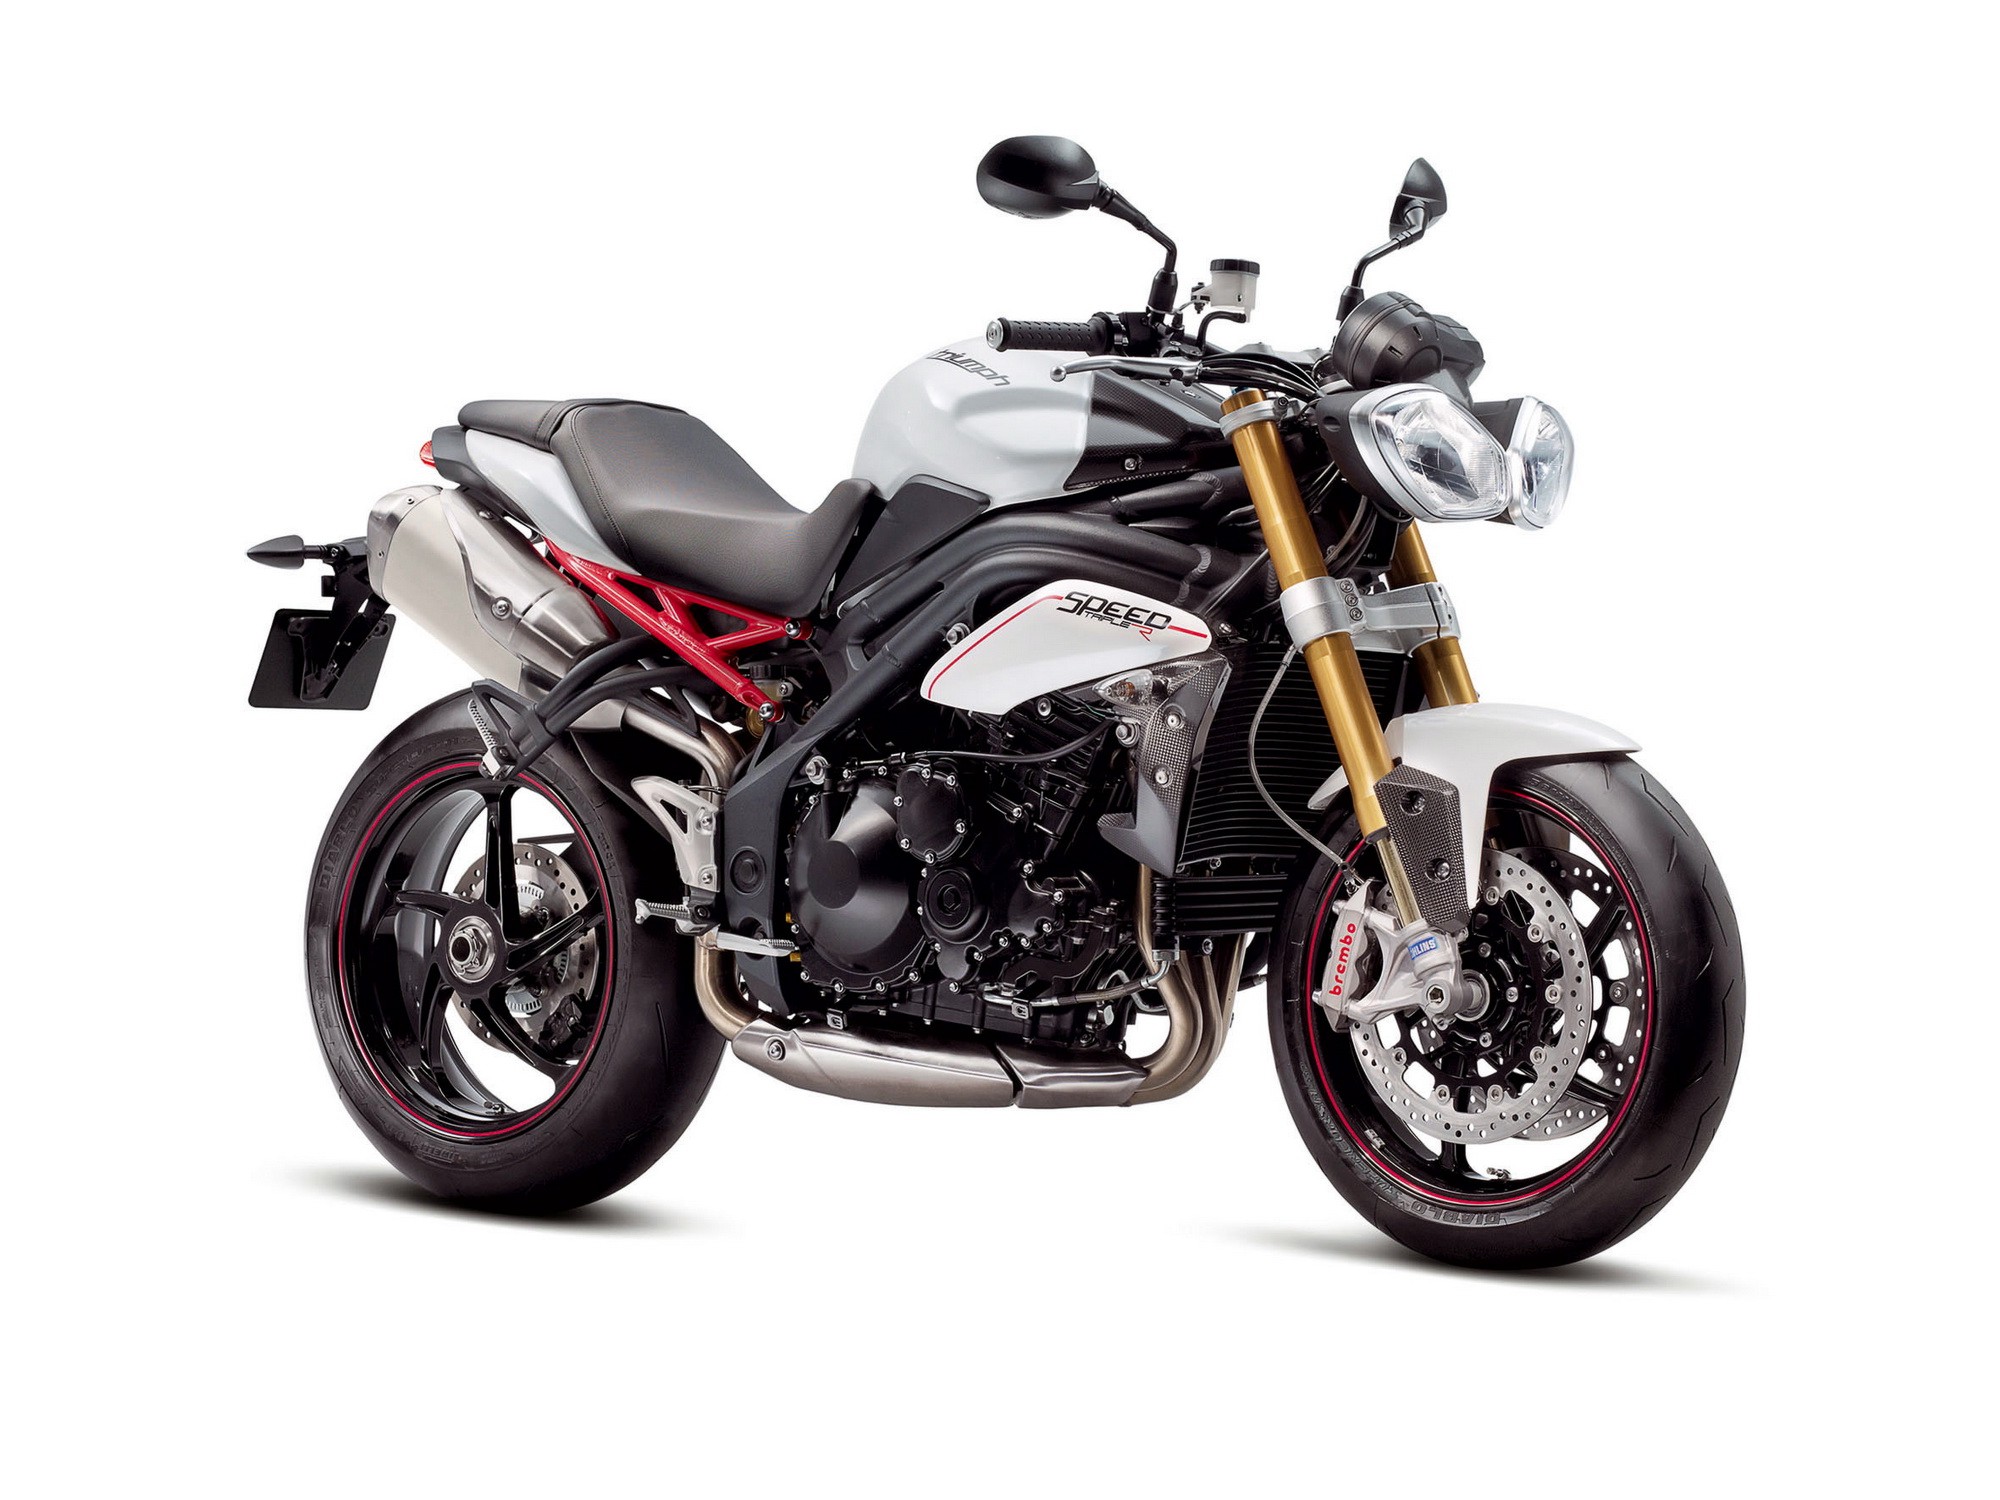 Motorcycle stylish, motorcycles, triumph speed triple, dear Free Stock Photos